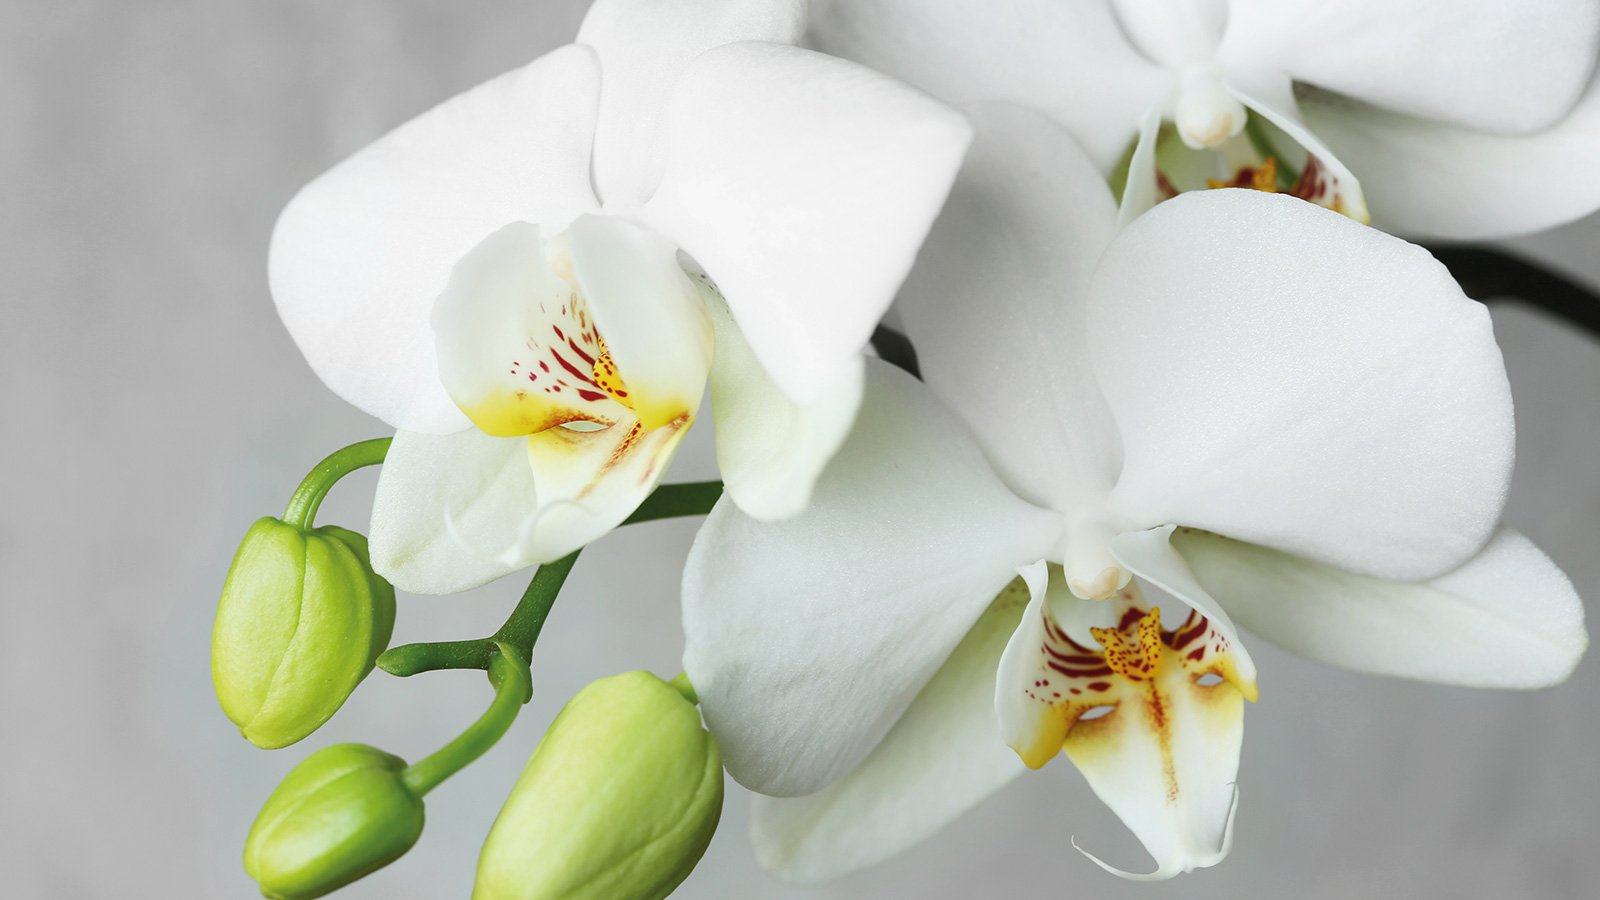 Over 4,000 species of orchids are found in Colombia.